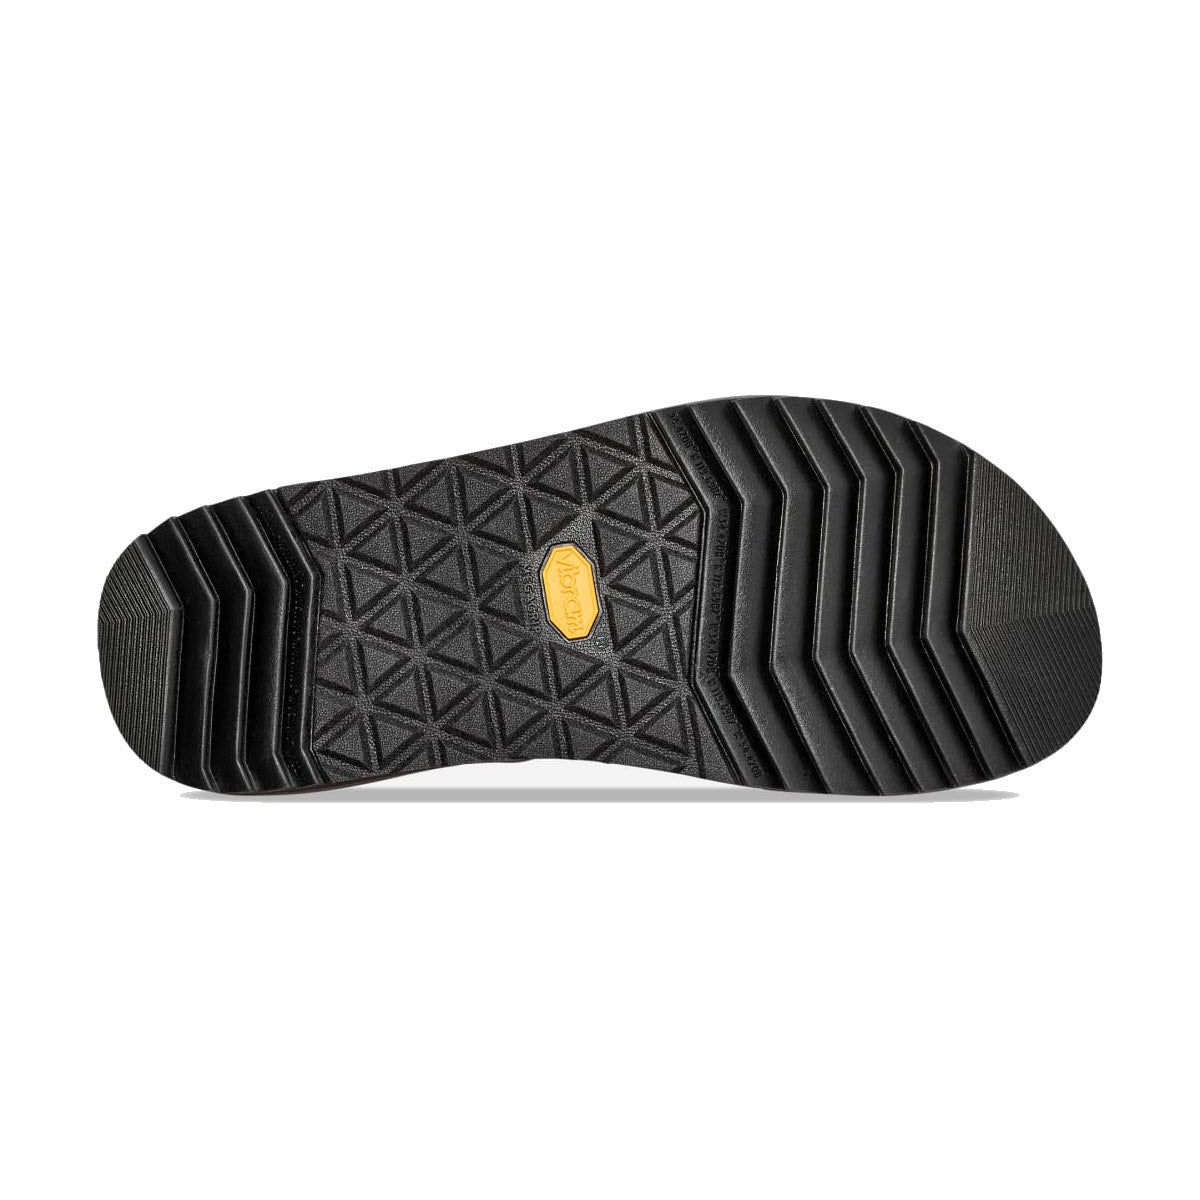 Sole of a Teva shoe featuring a geometric tread pattern and a small, rectangular yellow logo in the center, upgraded with a Vibram® Megagrip outsole.